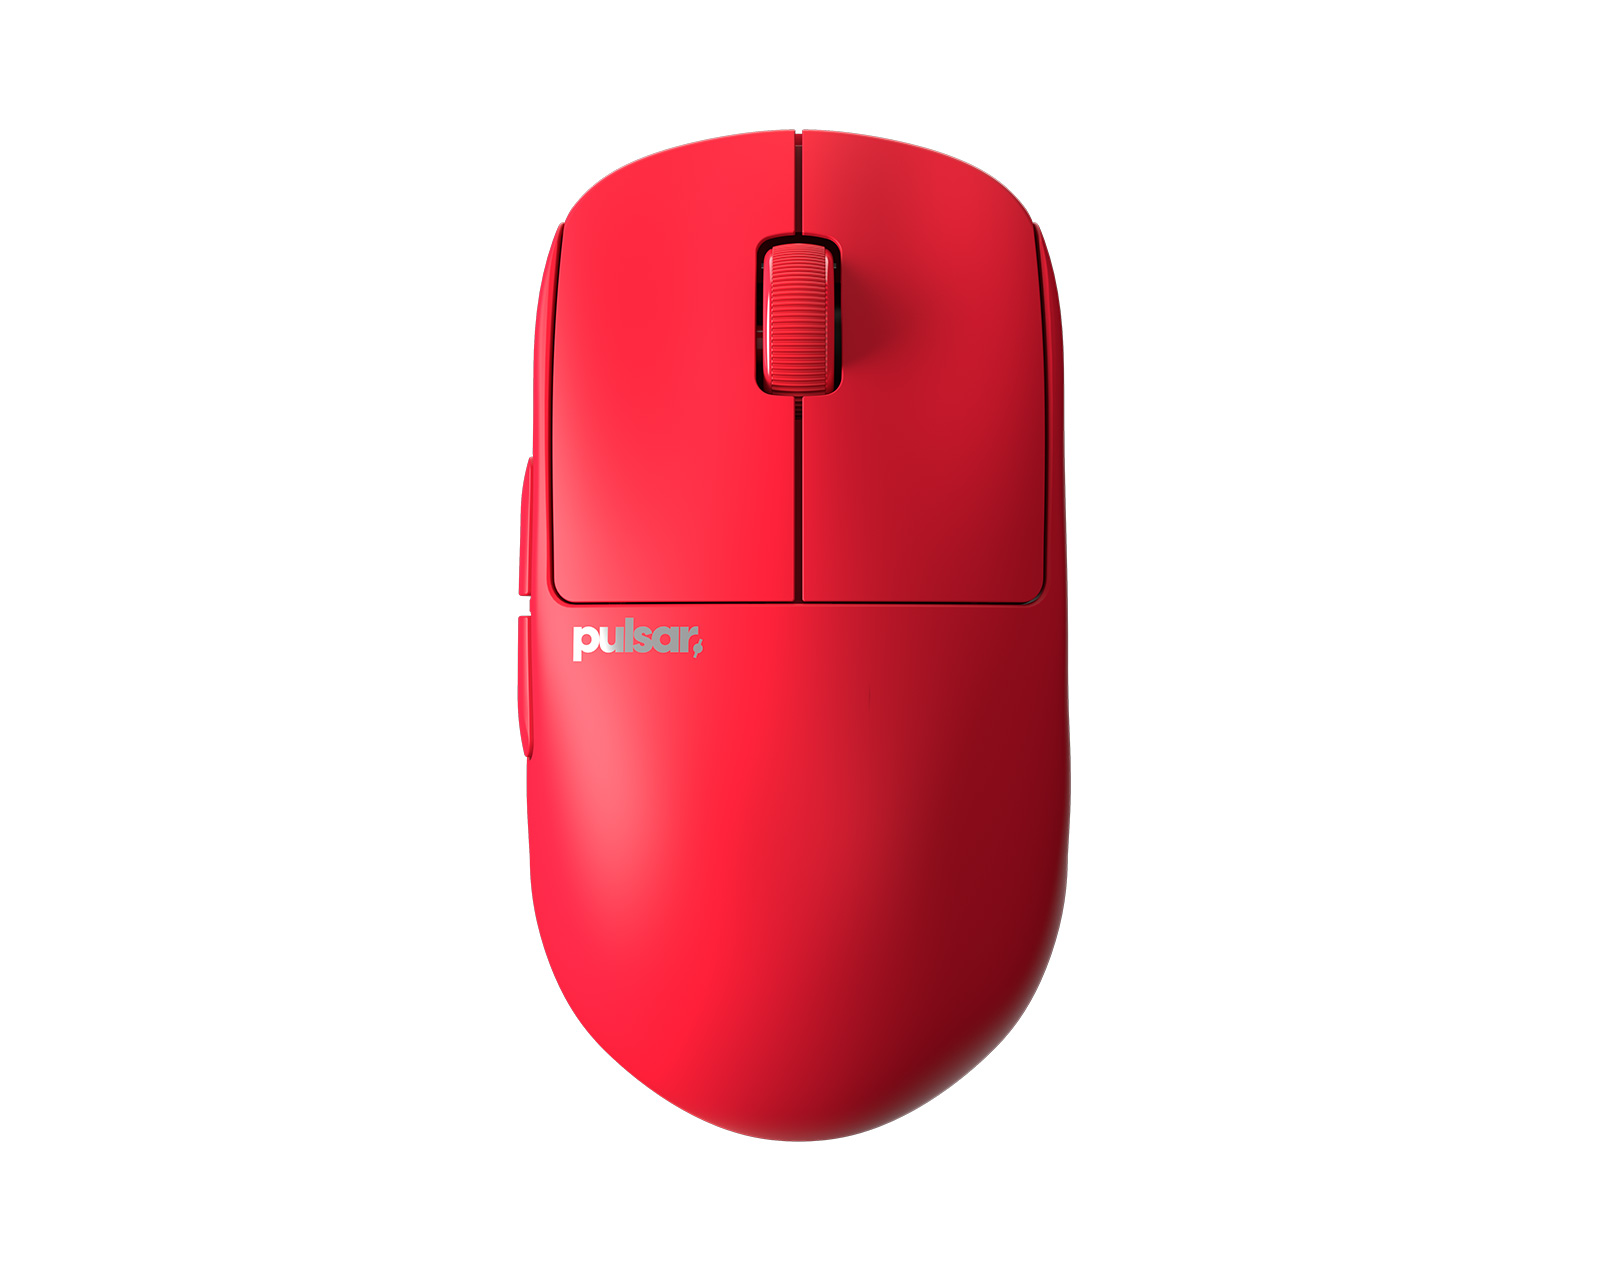 Pulsar X2-H High Hump Wireless Gaming Mouse - Mini - Red - Limited